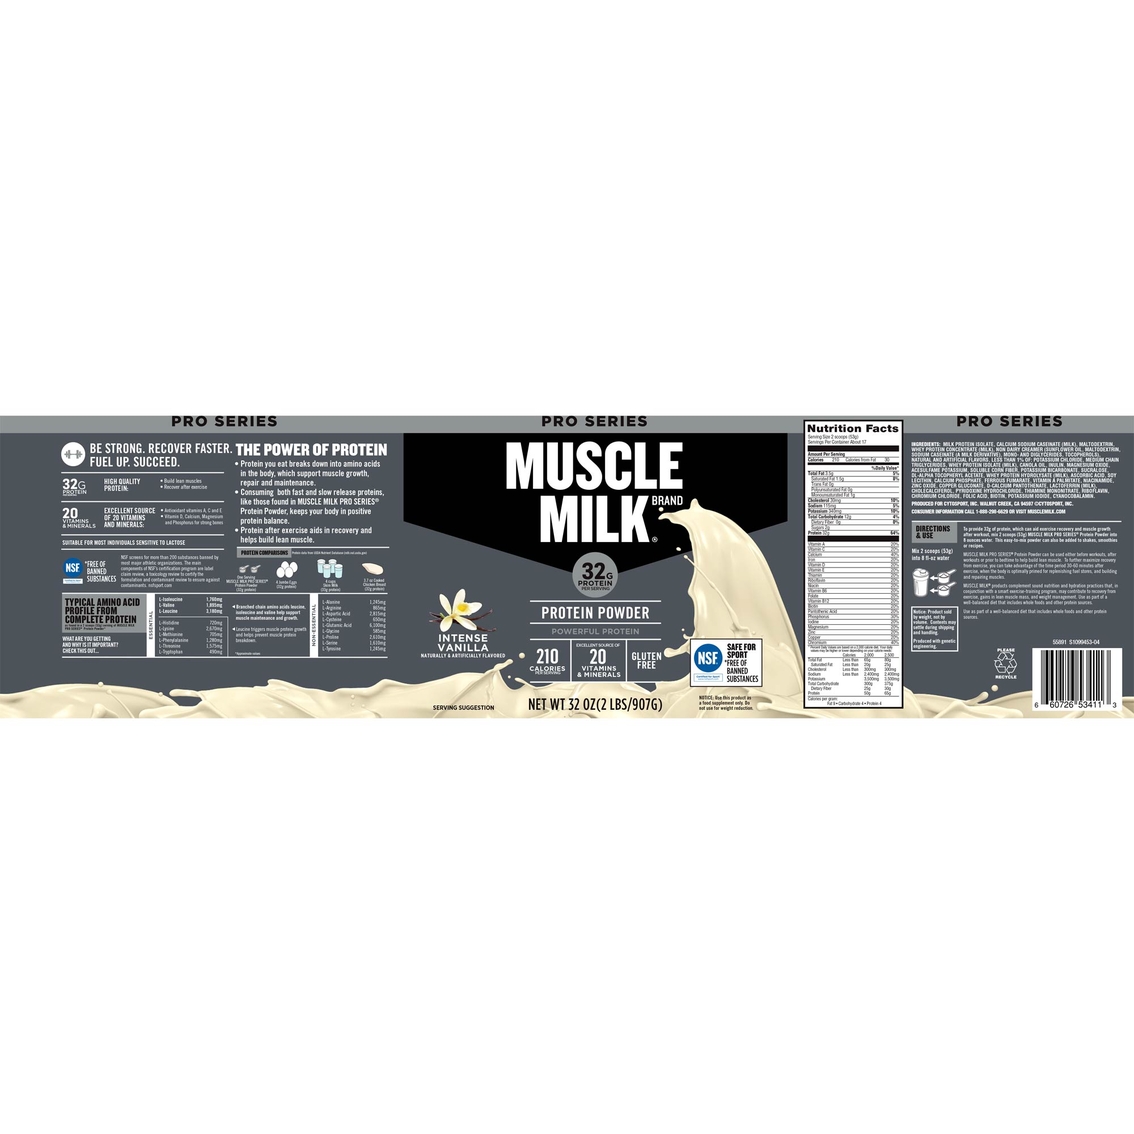 Muscle Milk Pro 50 Protein Powder - Image 2 of 2